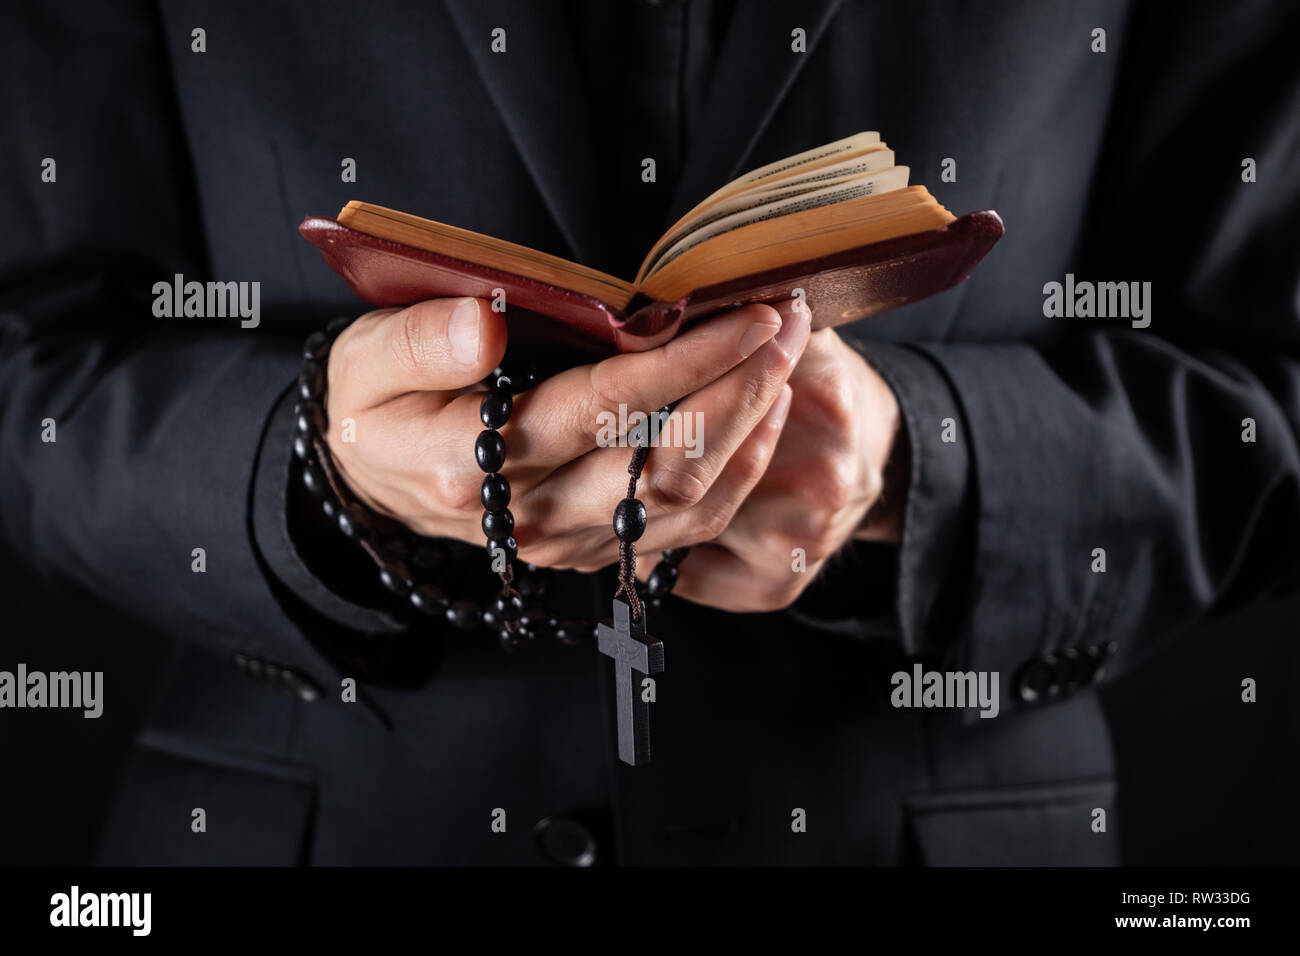 Hands of a christian priest dressed in black holding a crucifix and reading New Testament book. Religious person studies Bible and holds prayer beads, Stock Photo